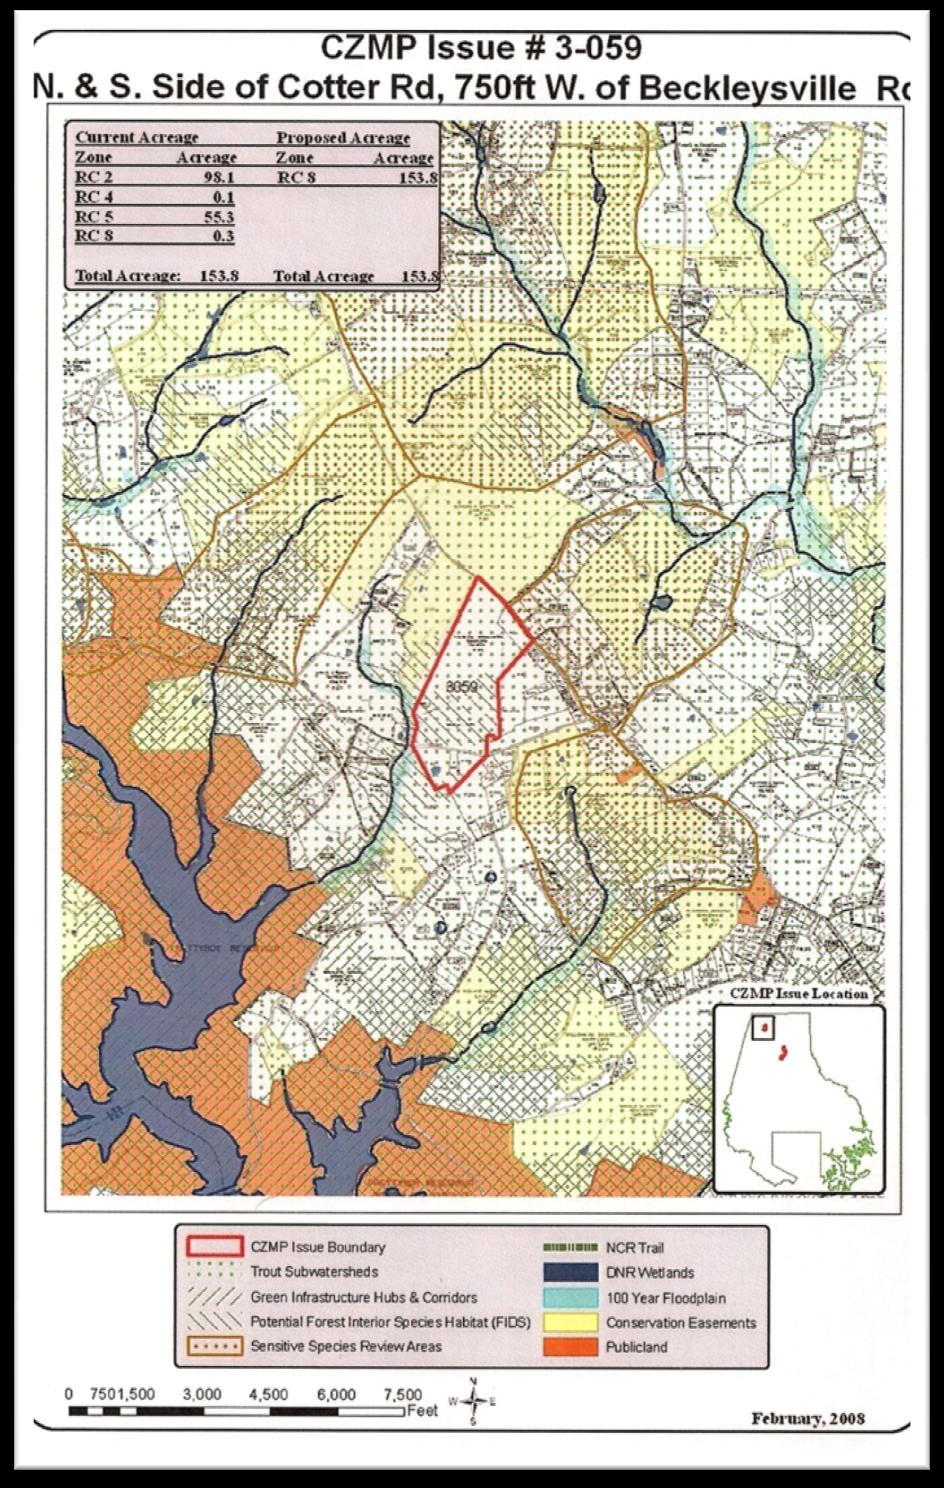 Baltimore County's Master Plan for 2010 establishes the Prettyboy Watershed as a : resource preservation area, agricultural preservation area, and historical and scenic area.